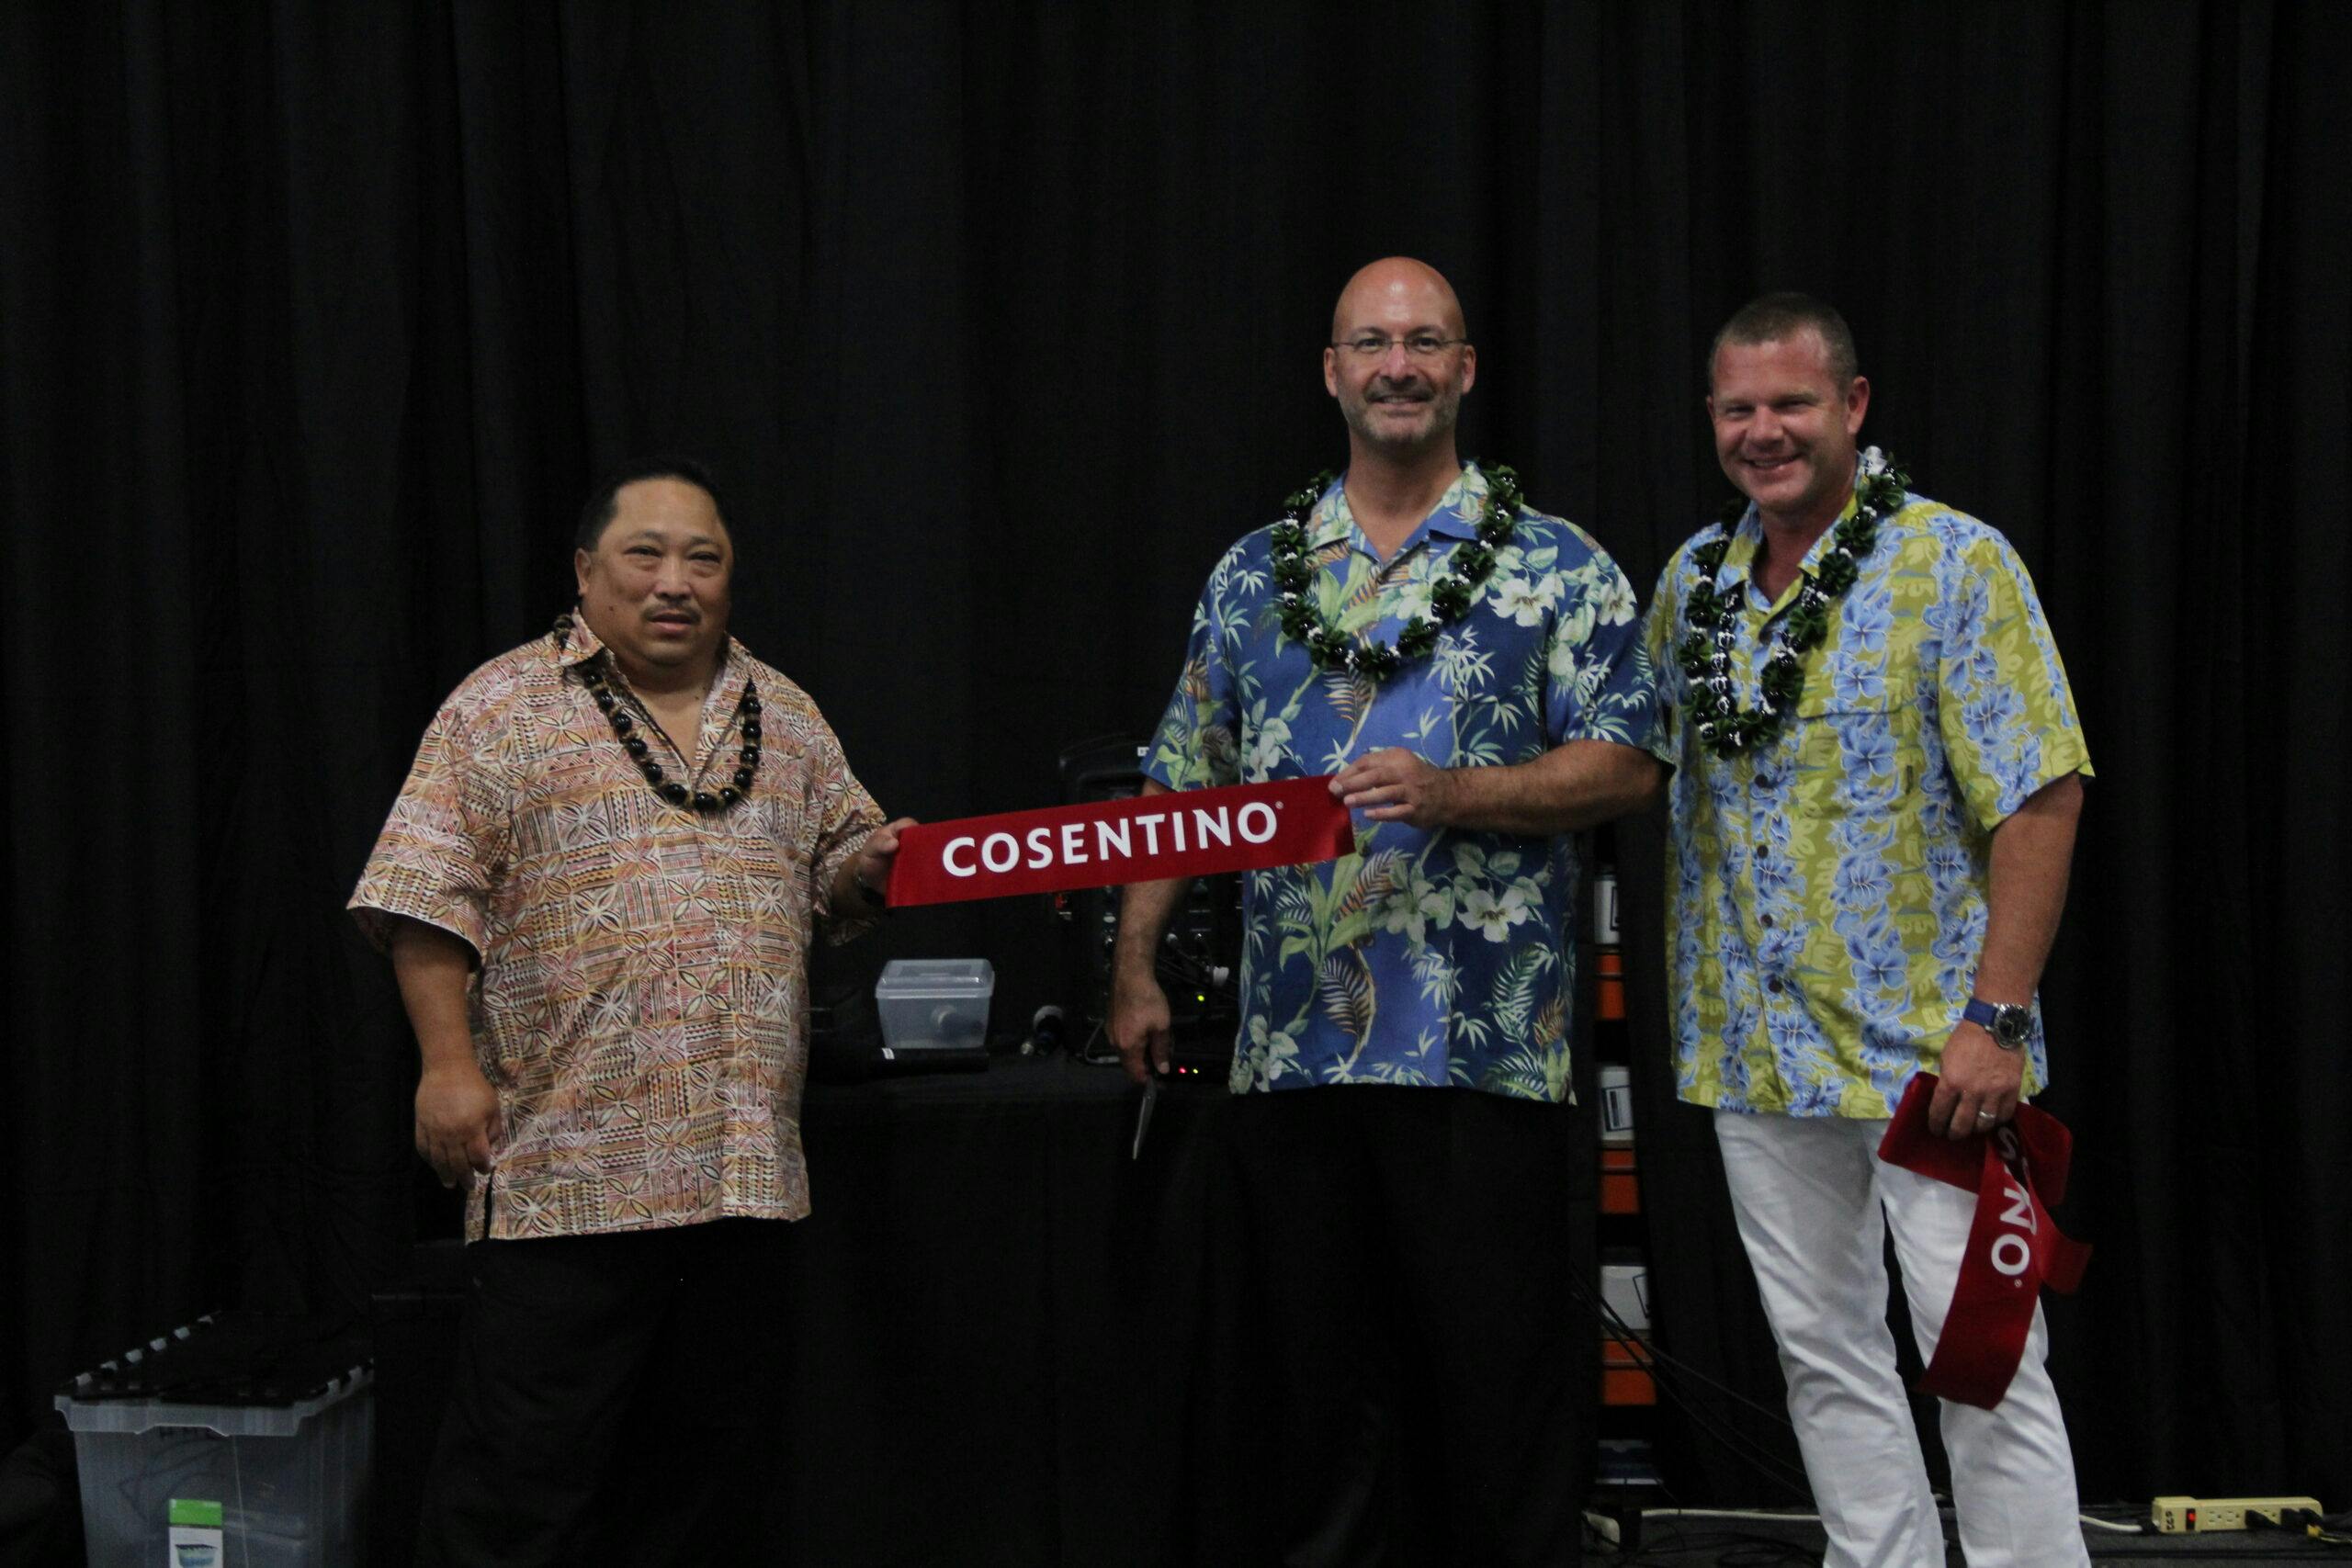 Image 33 of 2018 07 12 06.23.04 5 scaled in Cosentino Opens First Hawaii Center in Honolulu - Cosentino